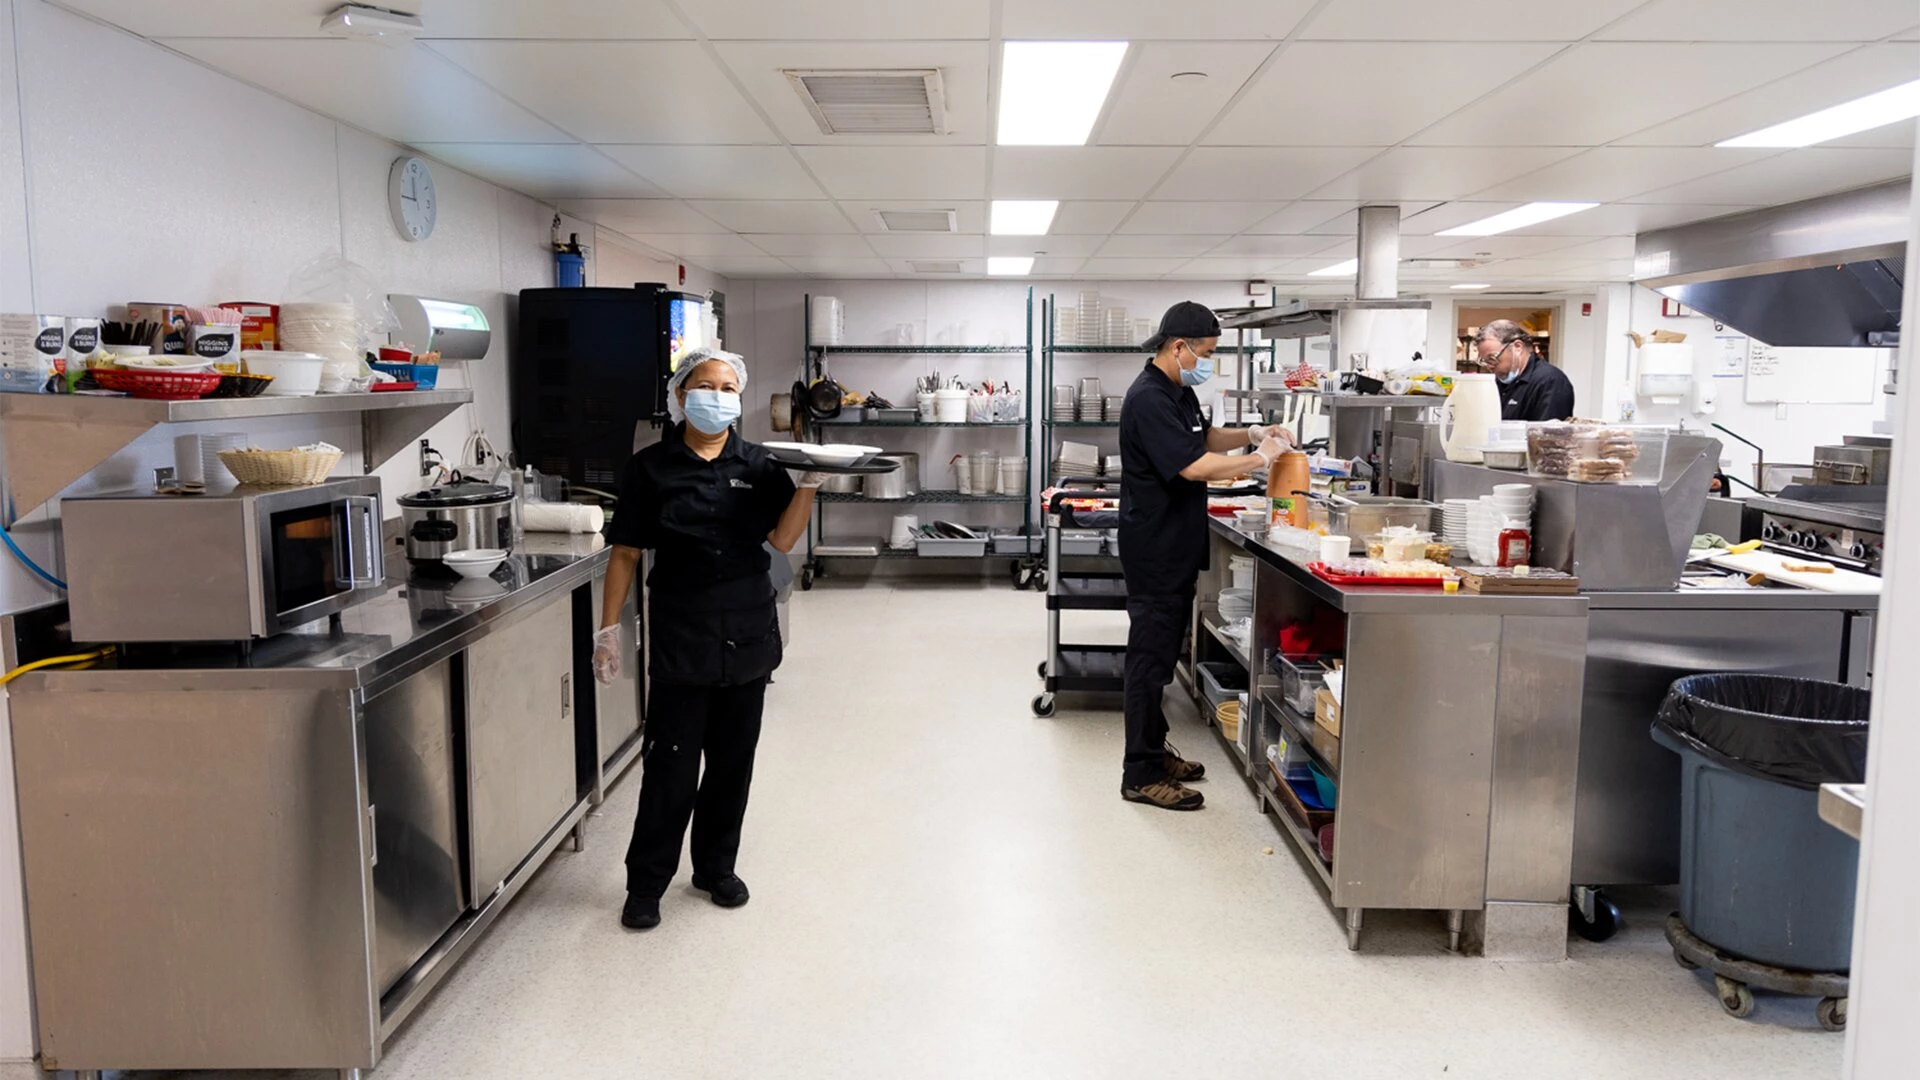 Clean, Hygienic and Well maintained kitchen on site